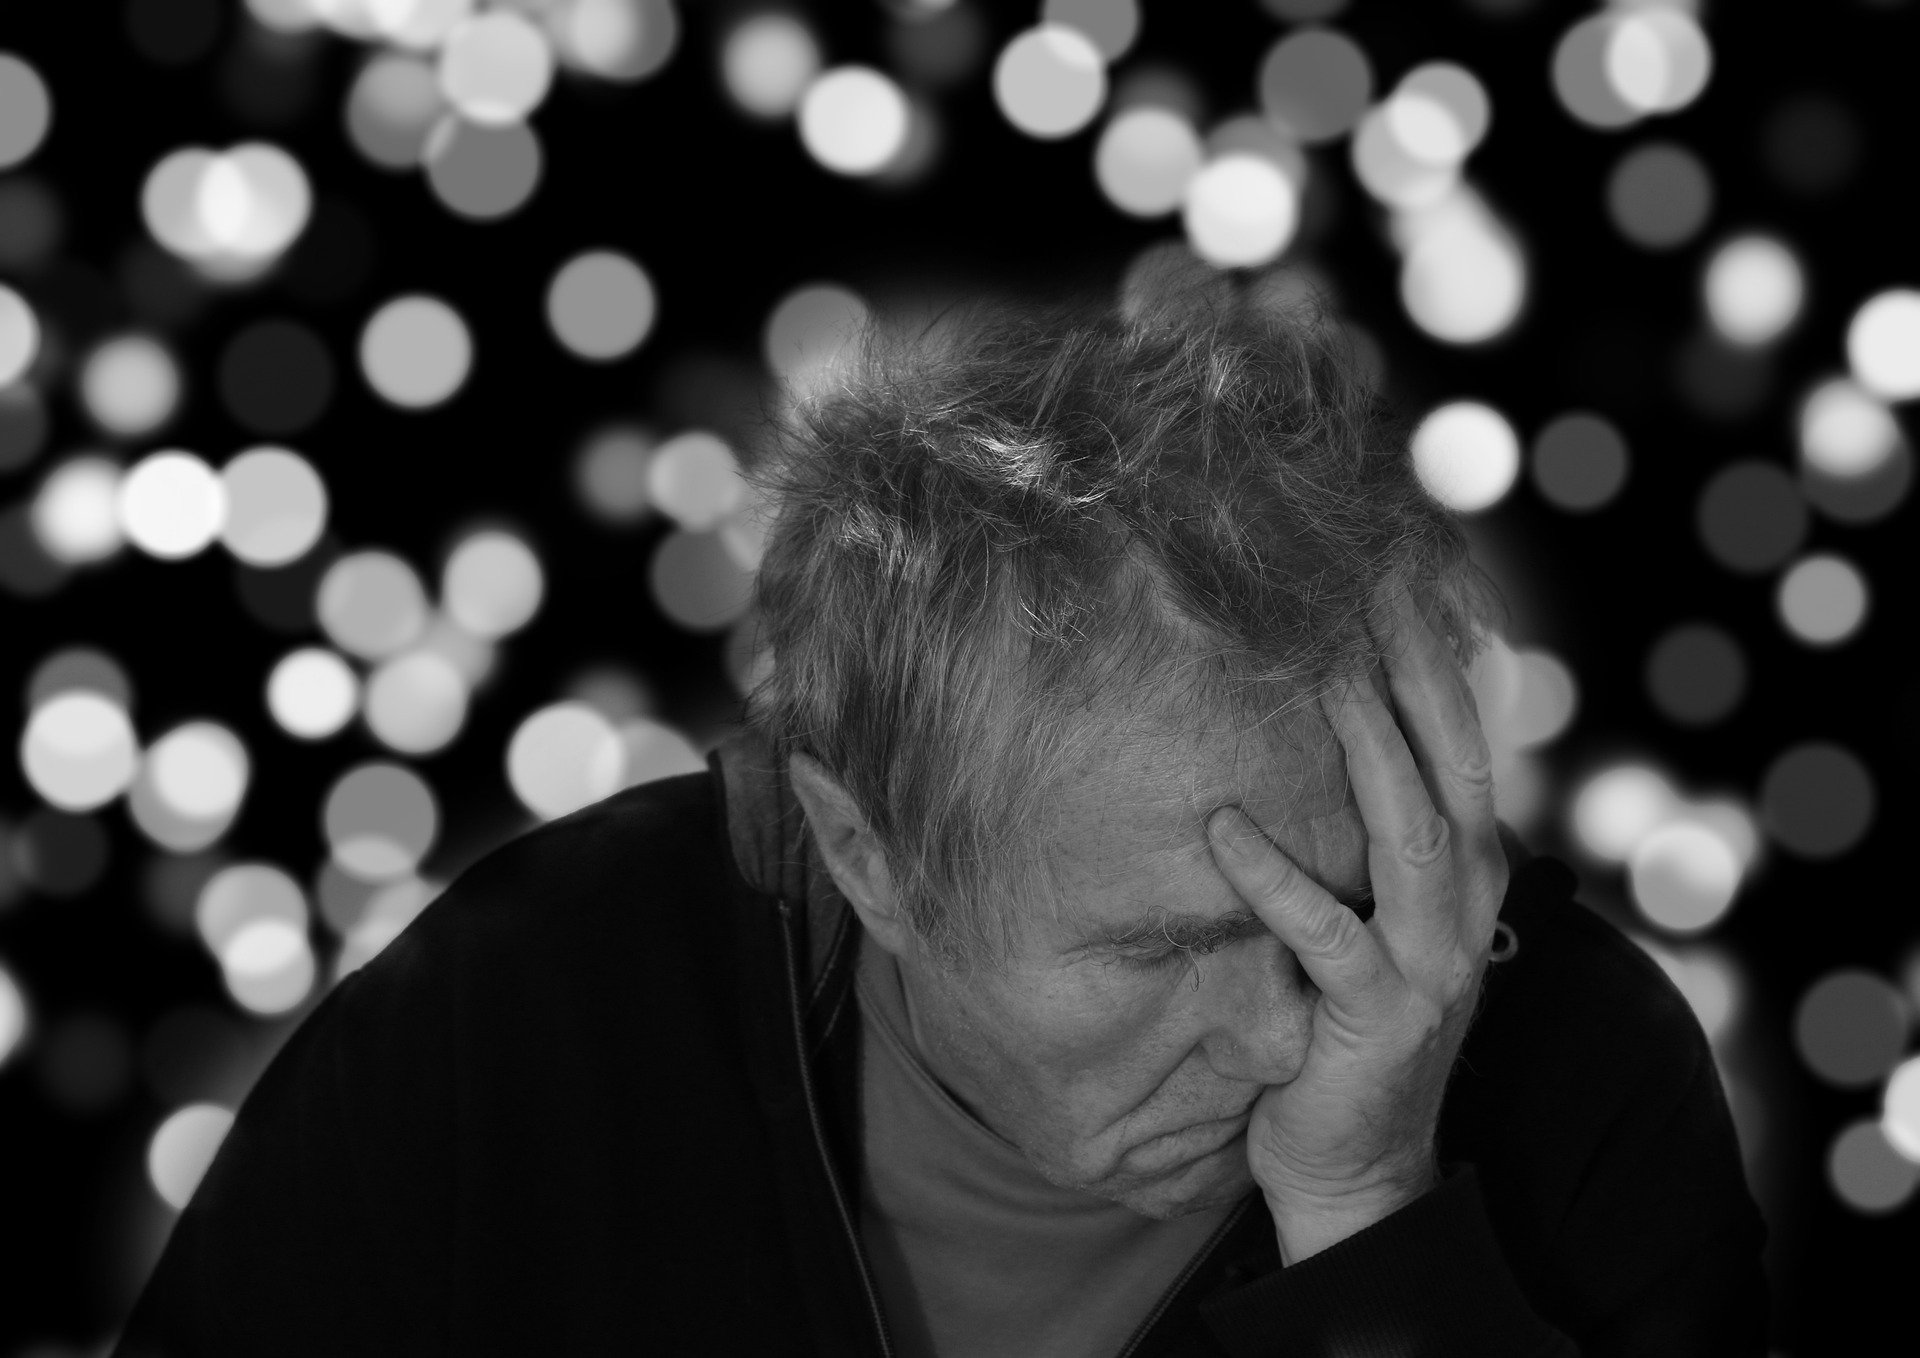 early retirement is linked to early onset dementia